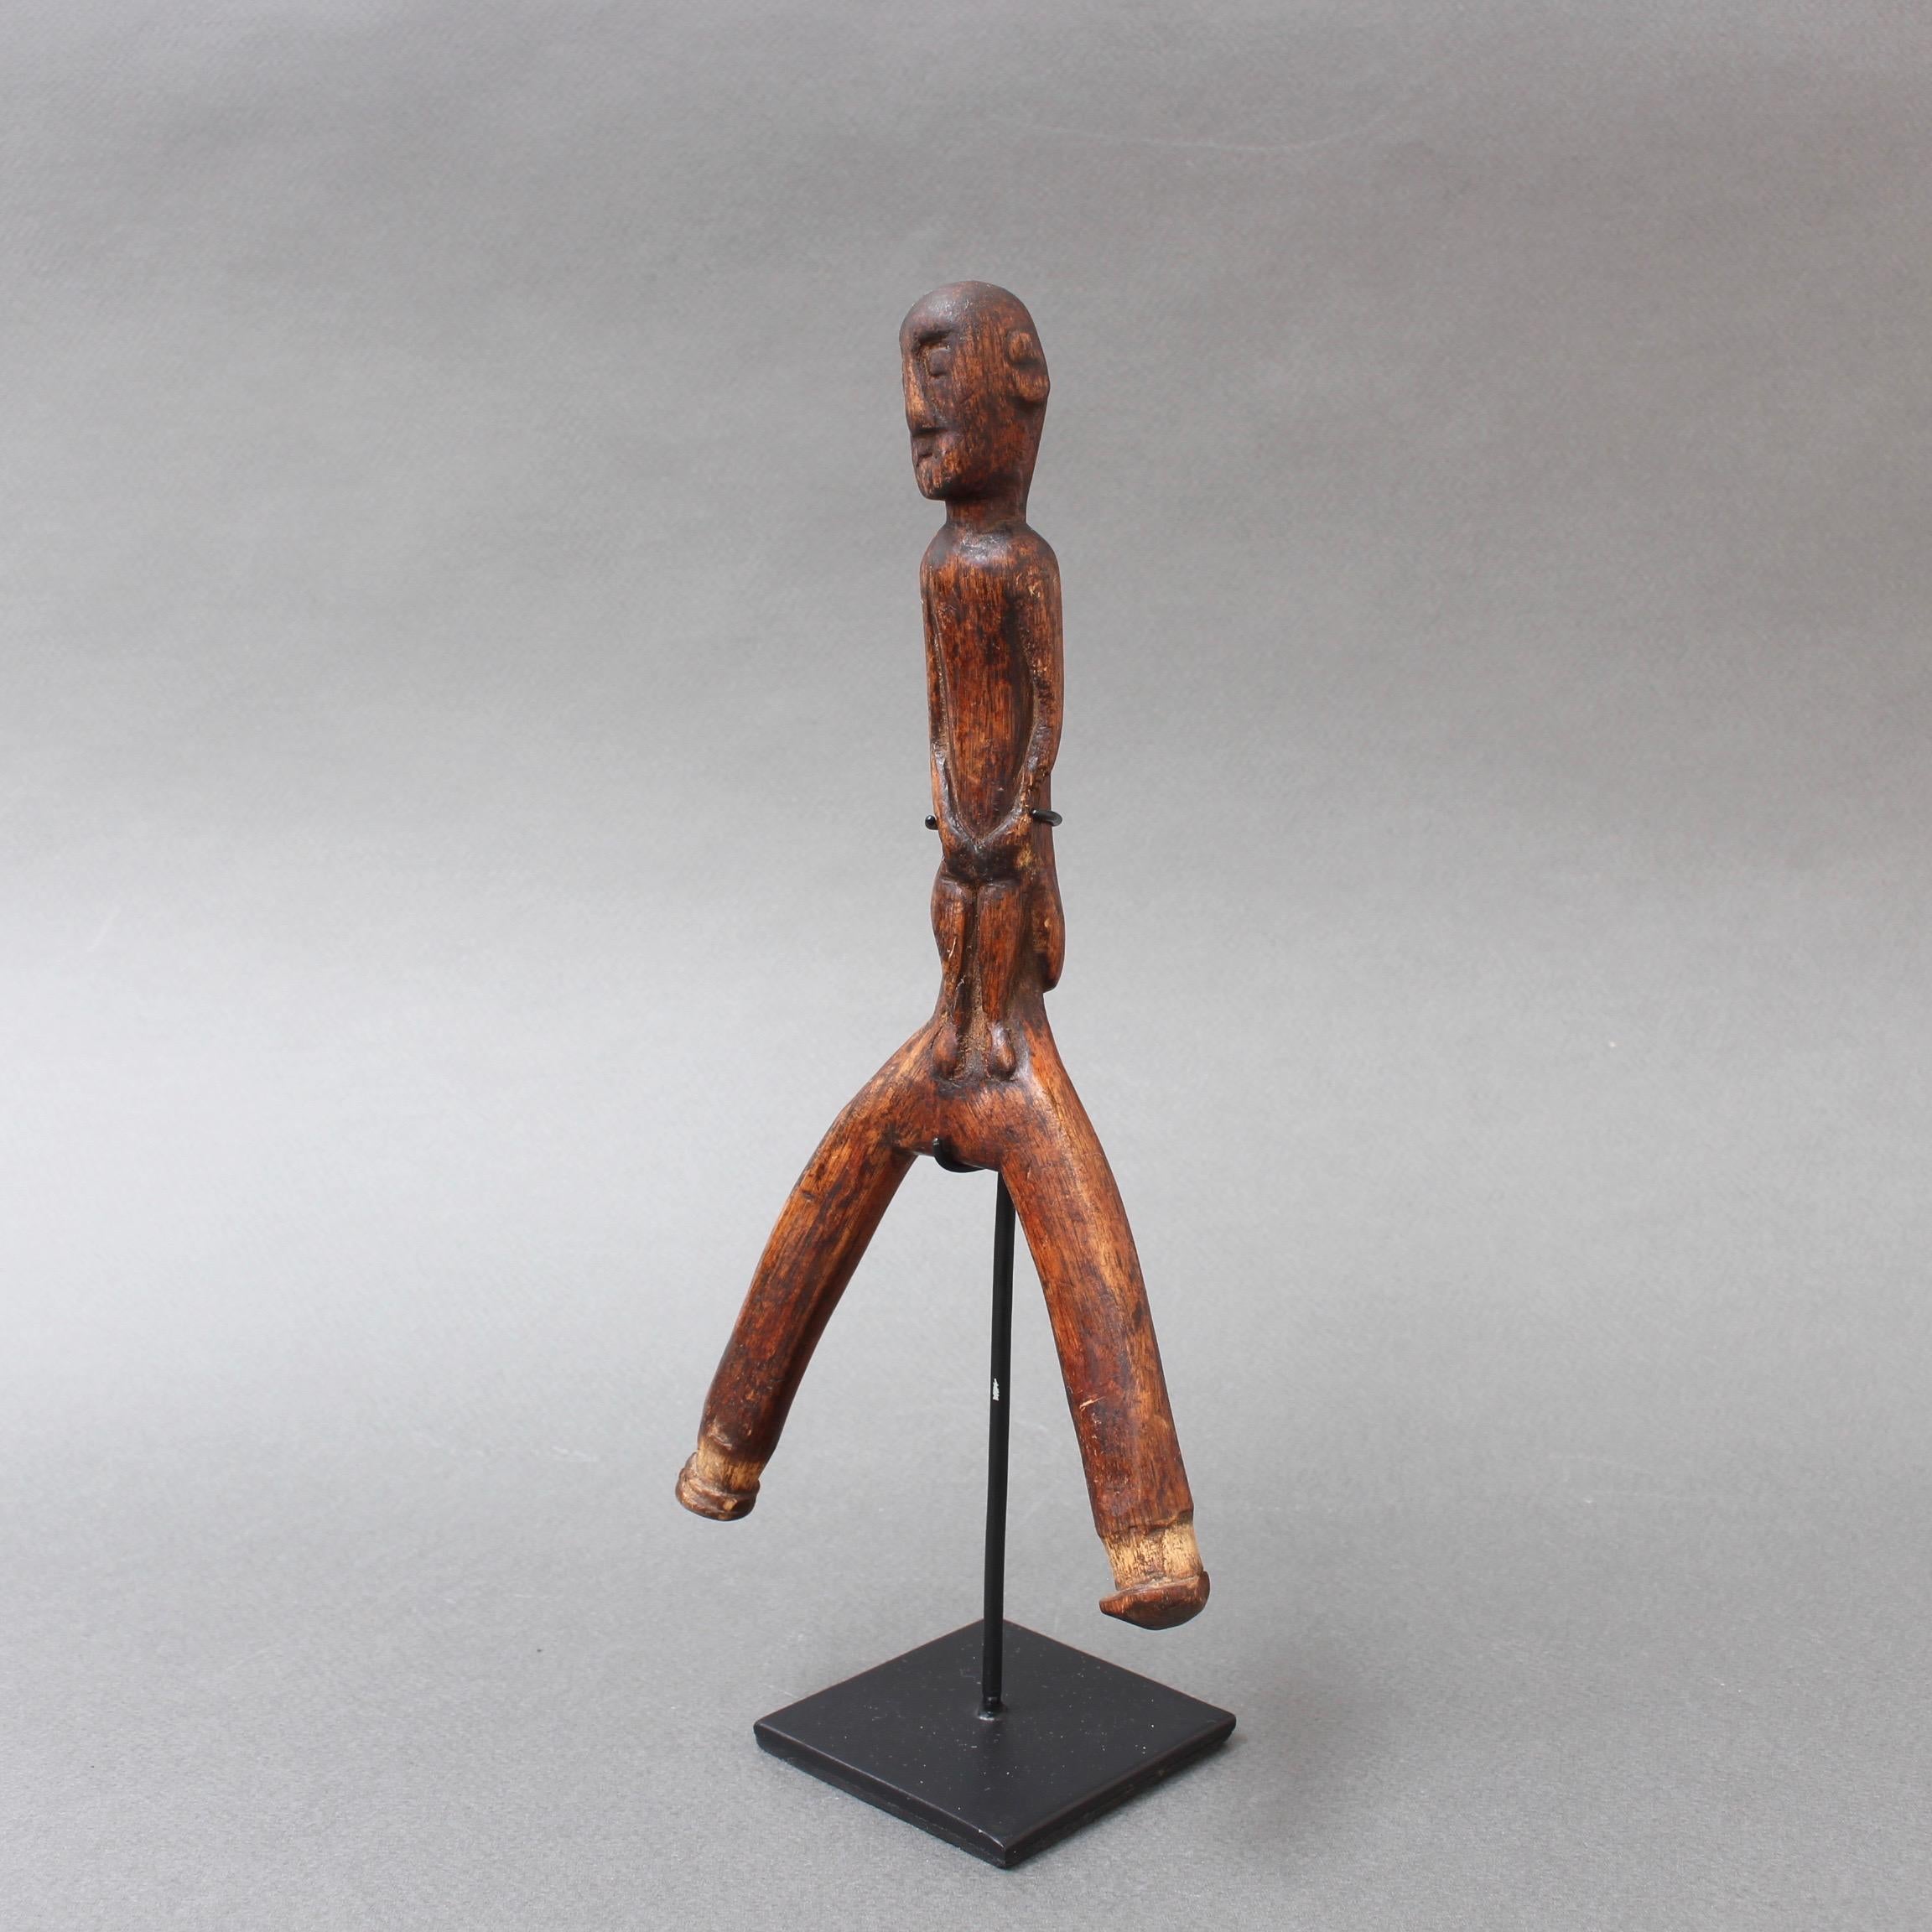 Carved wooden slingshot figure from Timor Island, Indonesia (circa 1970s) on contemporary stand. The standing figure forms the handle of this tribal weapon used to fire projectiles, perhaps at small game or for sport. Human figures were often carved